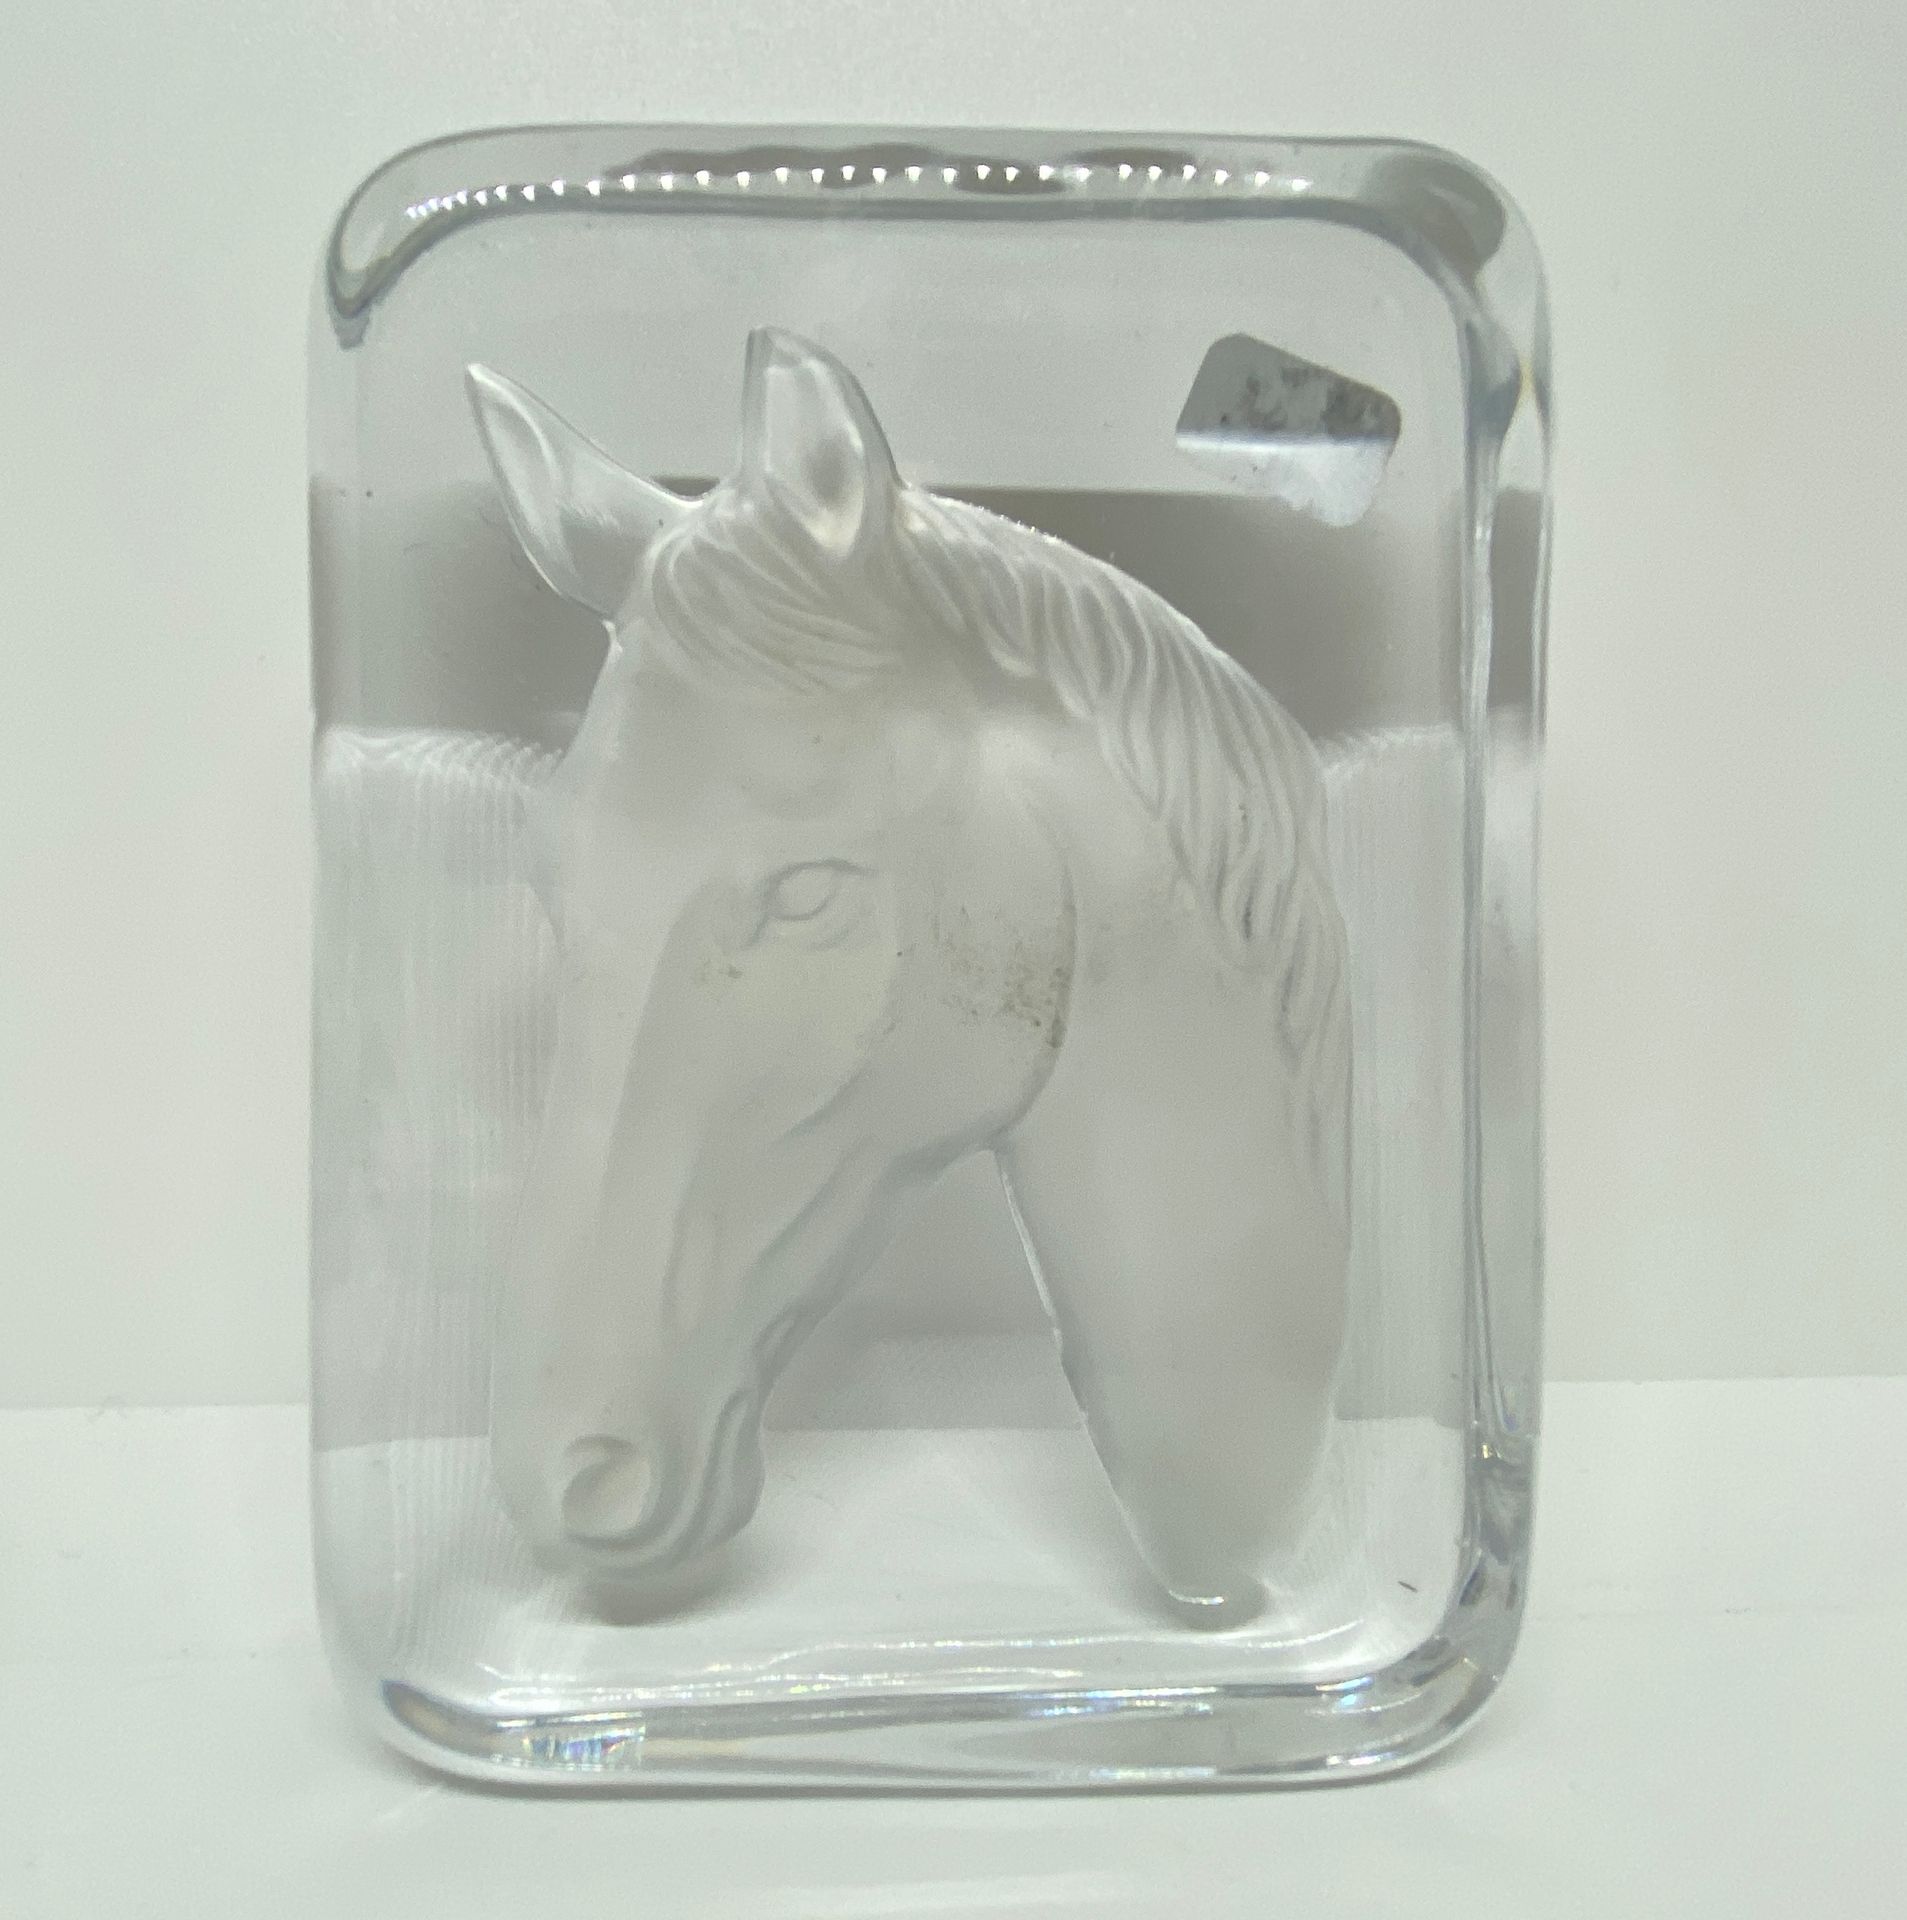 Null Paper press in crystal appearing a head of horse in relief.